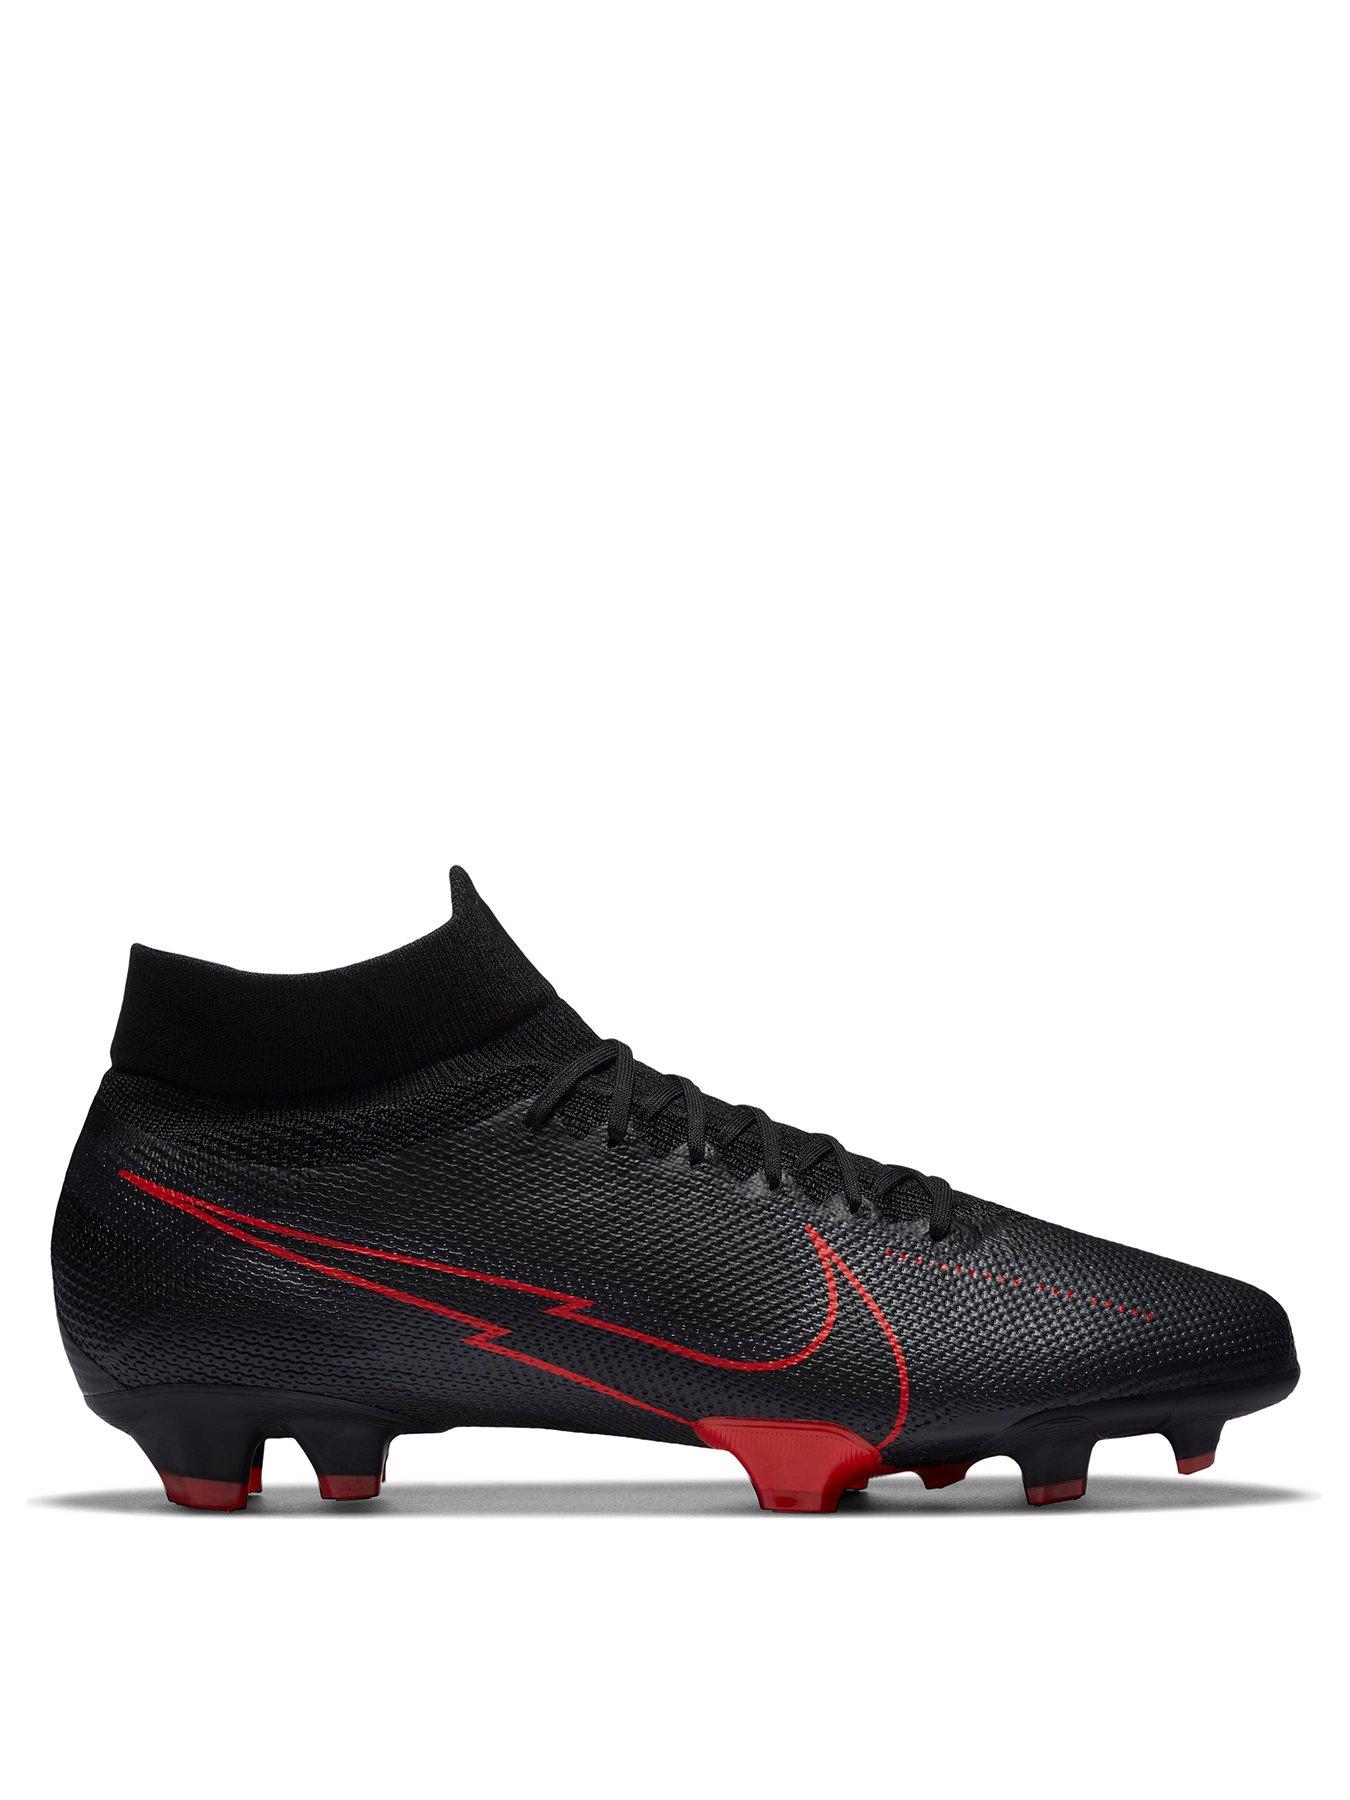 11 | Football boots | Mens sports shoes 